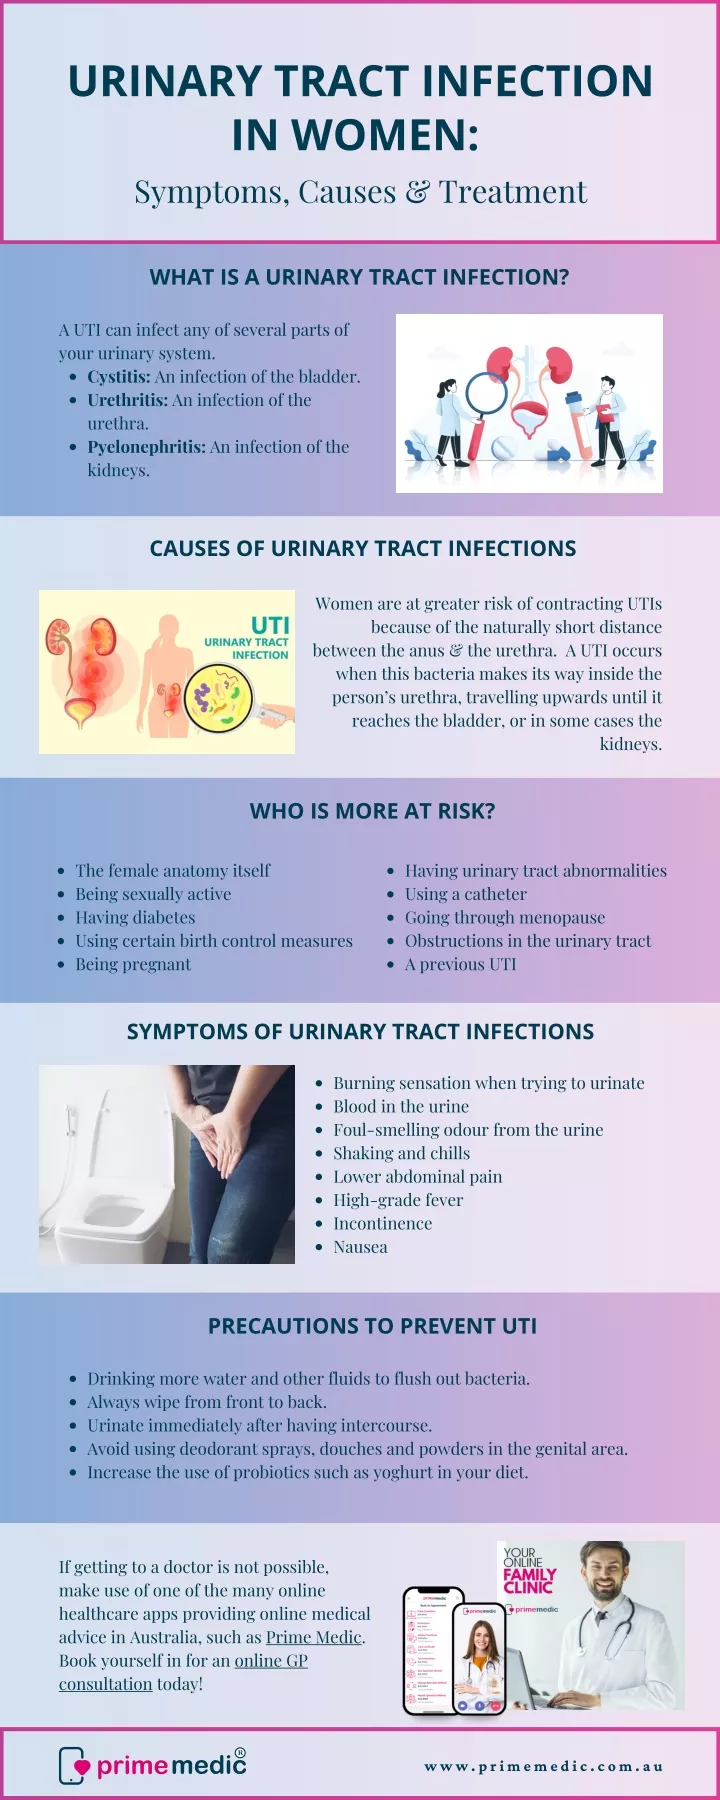 urinary tract infection in women symptoms causes